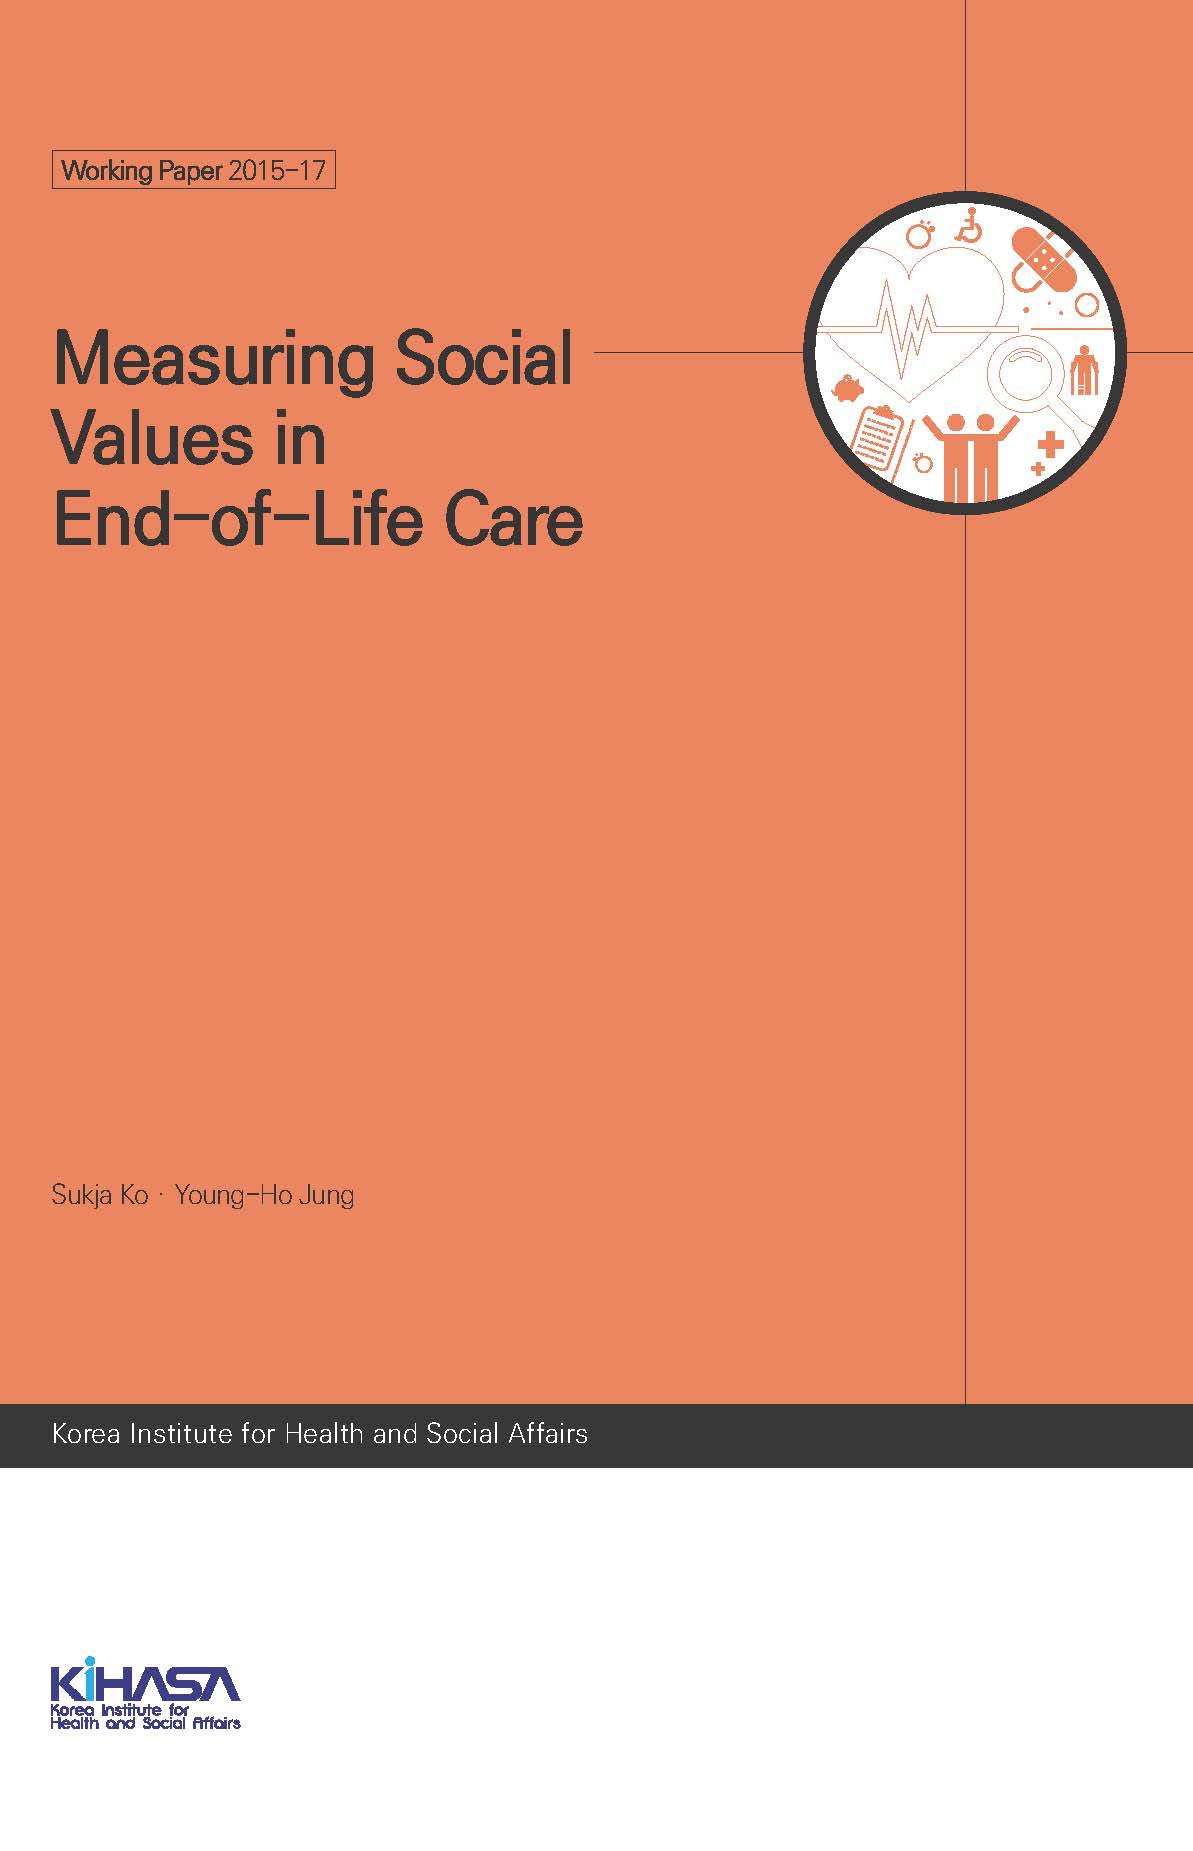 Measuring Social Values in End-of-Life Care